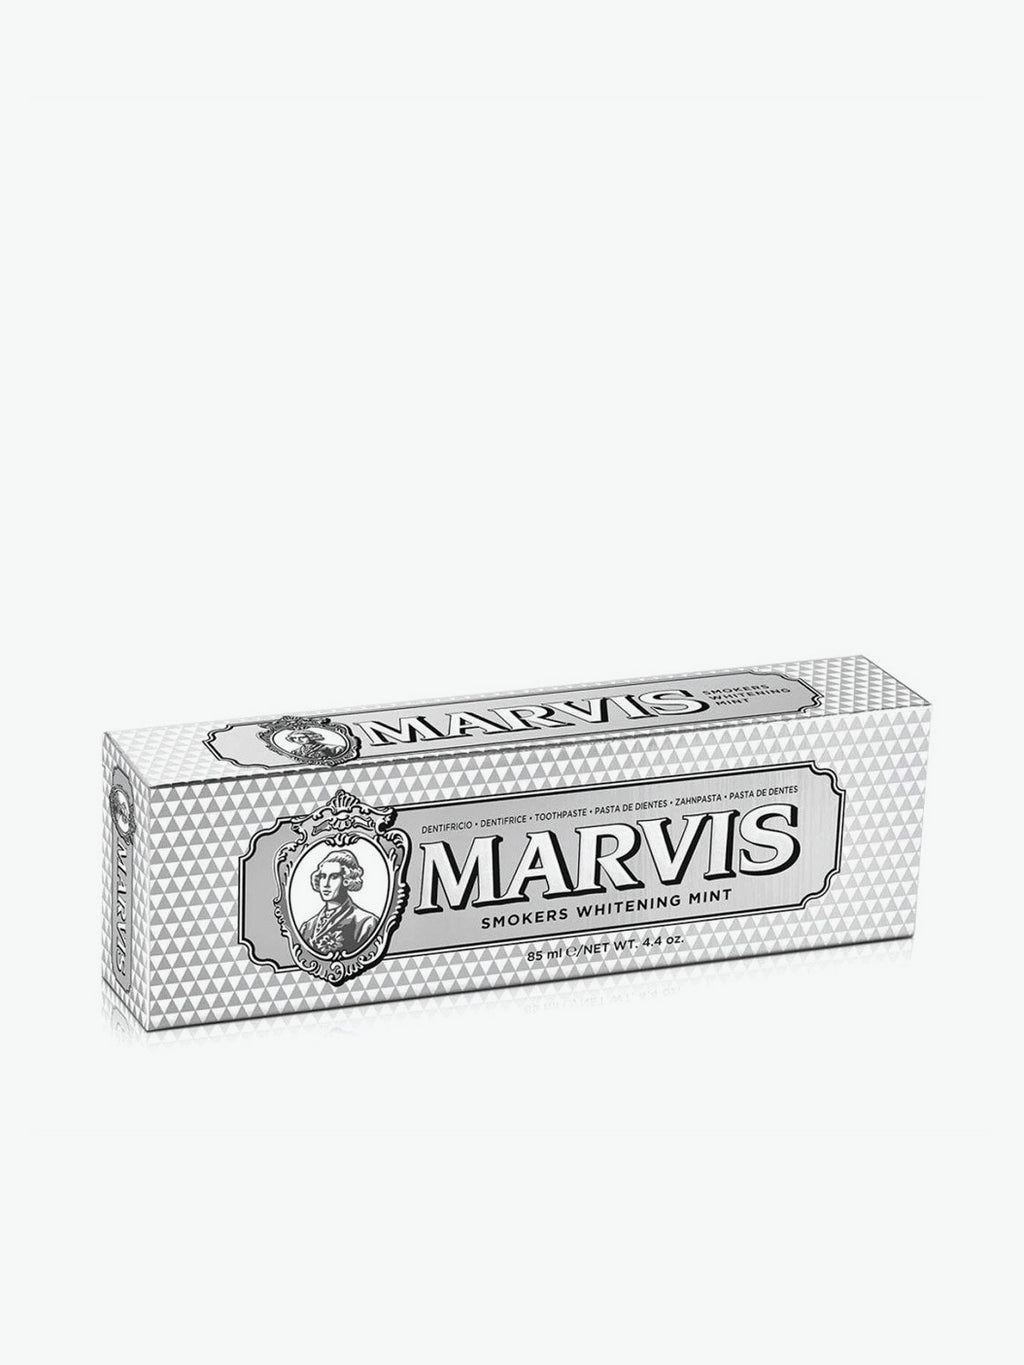 Marvis Smokers Whitening Mint Toothpaste 85ml | B